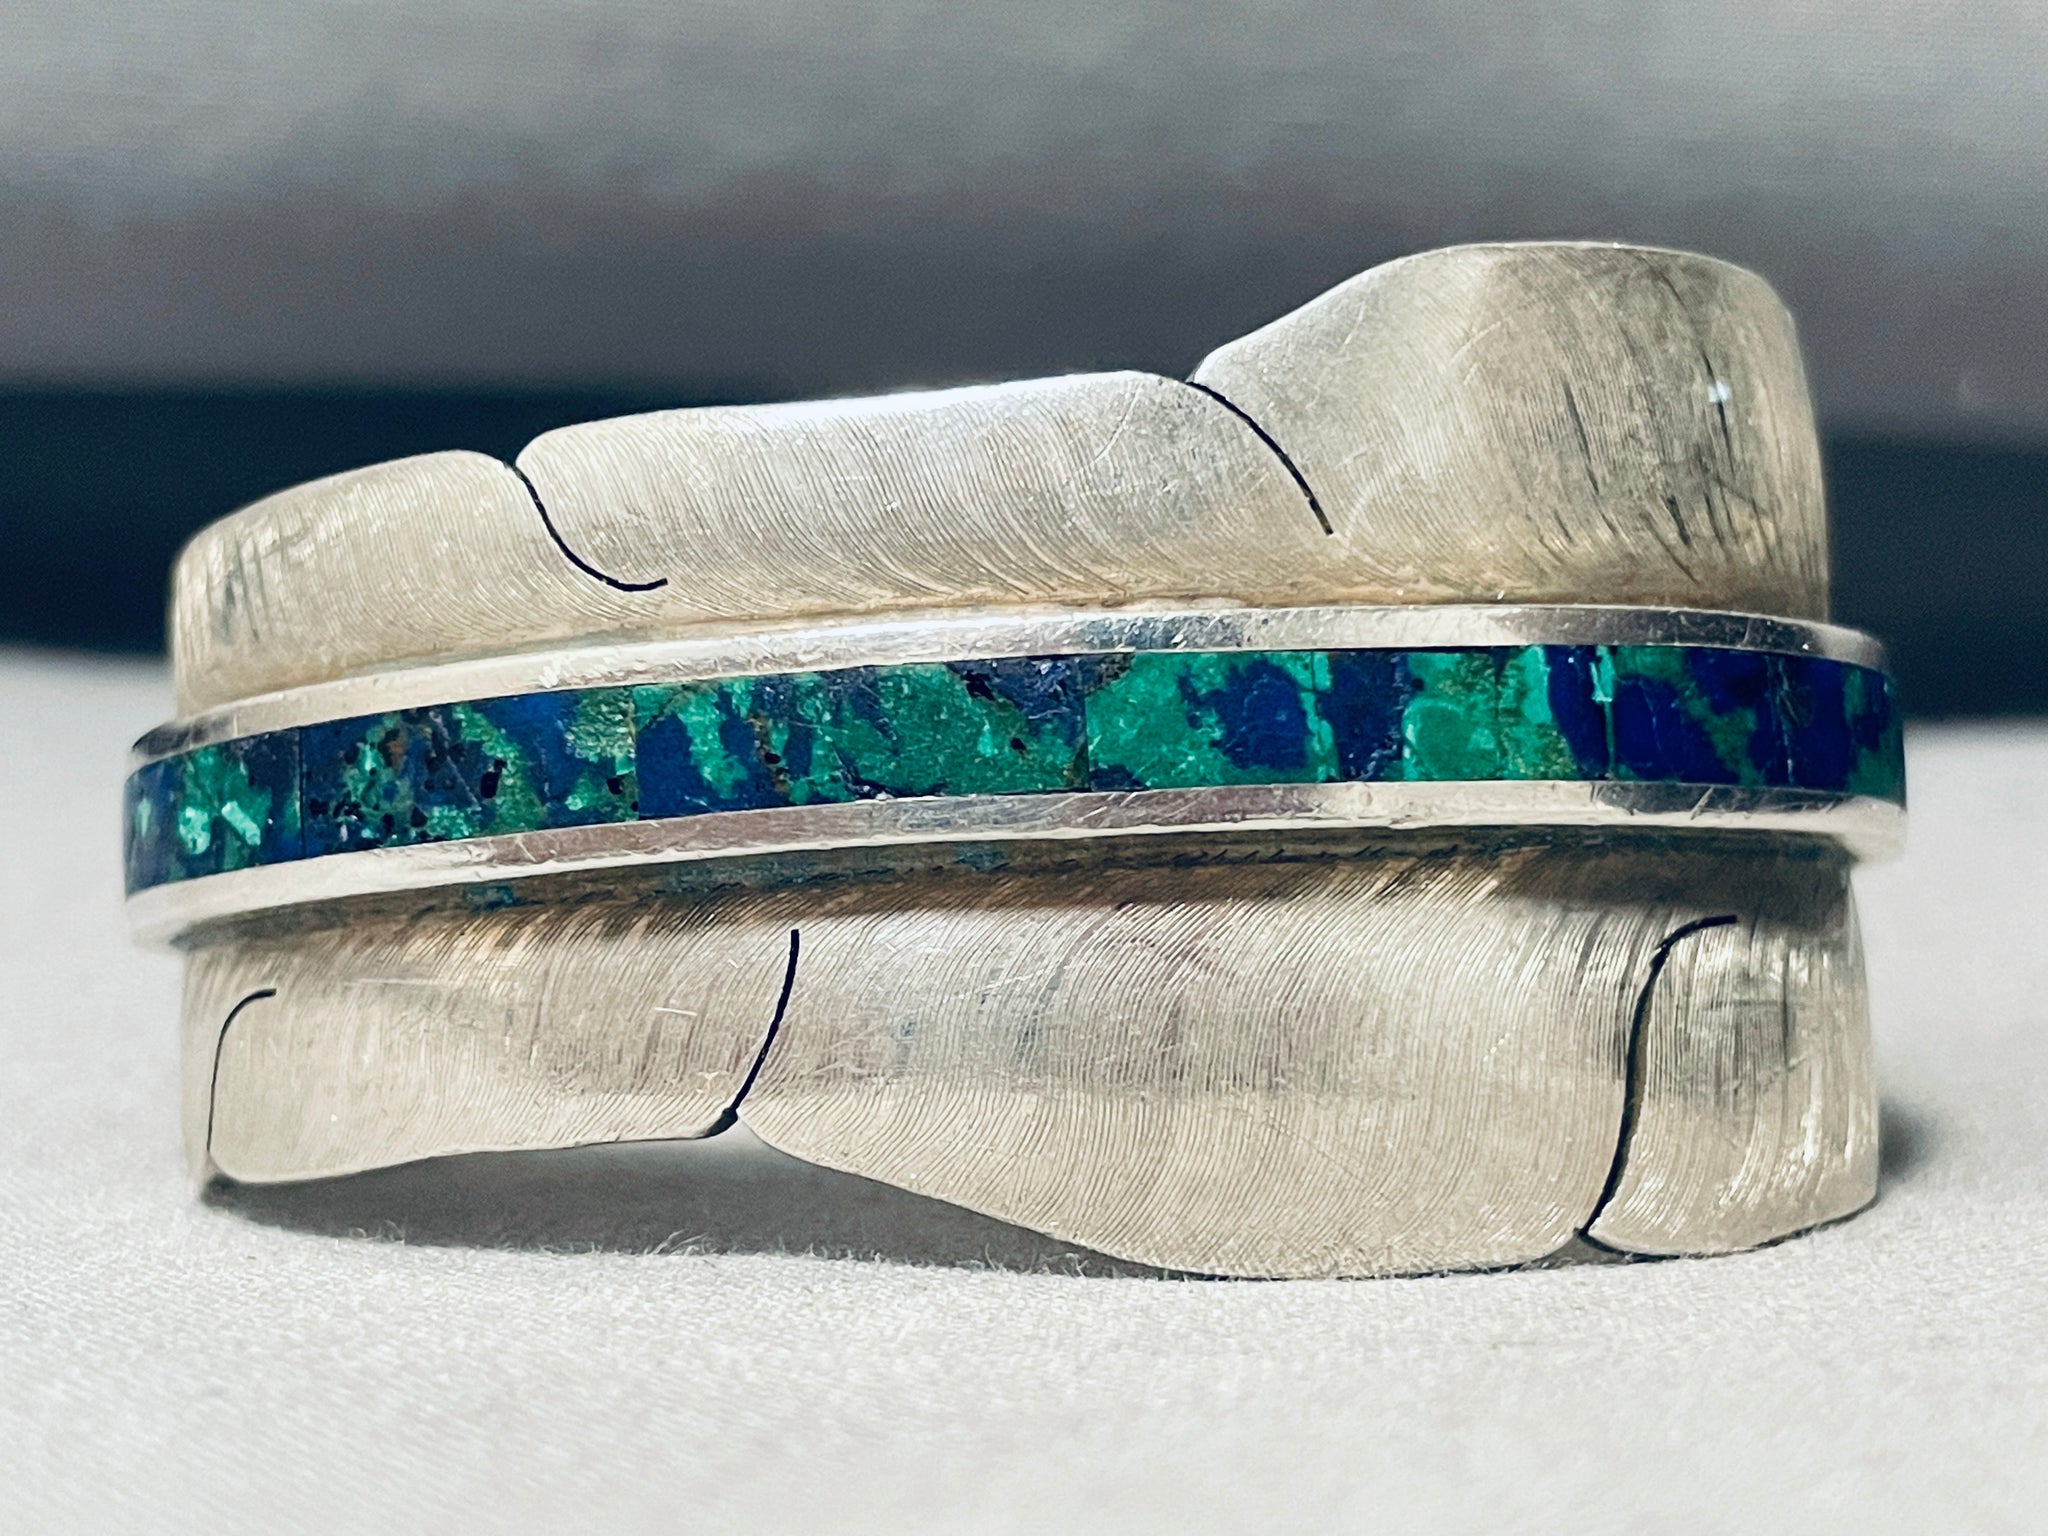 Azurite Bracelet with 925 Silver Spacers